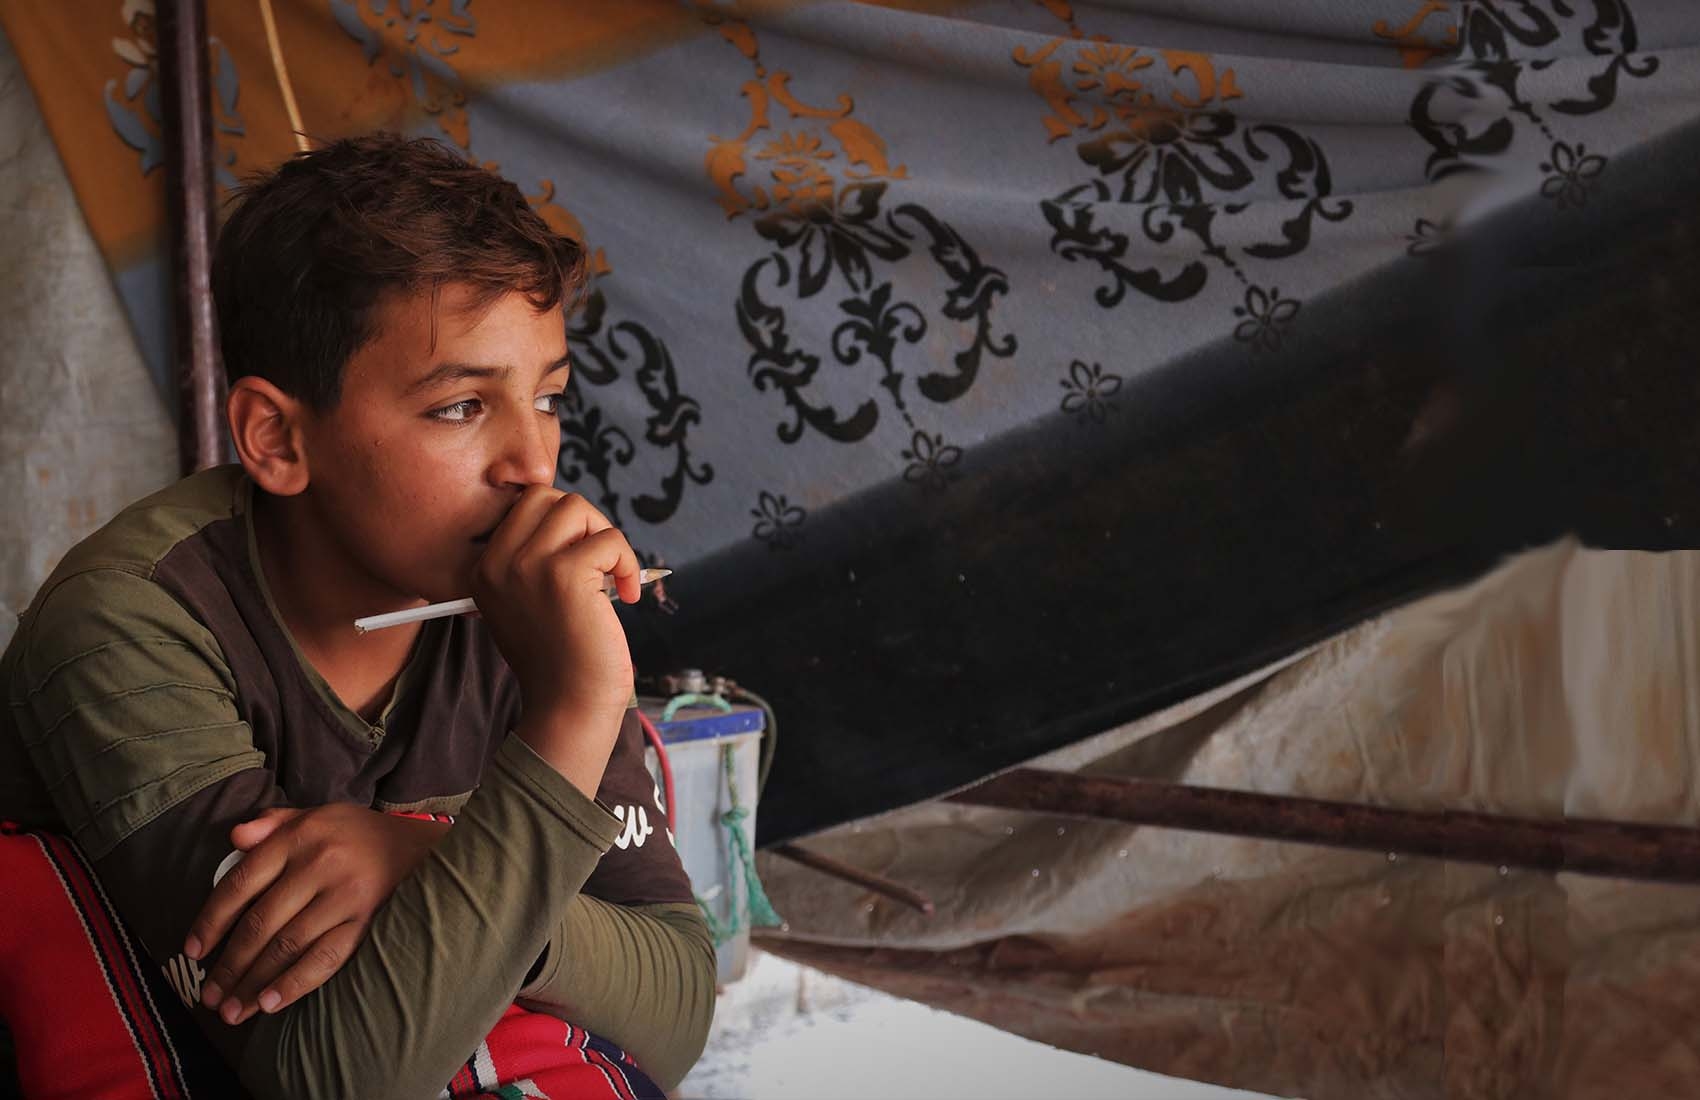 A 12-year old boy uses a cell phone to continue studying outside of school while resting at his home in a refugee camp in Syria.